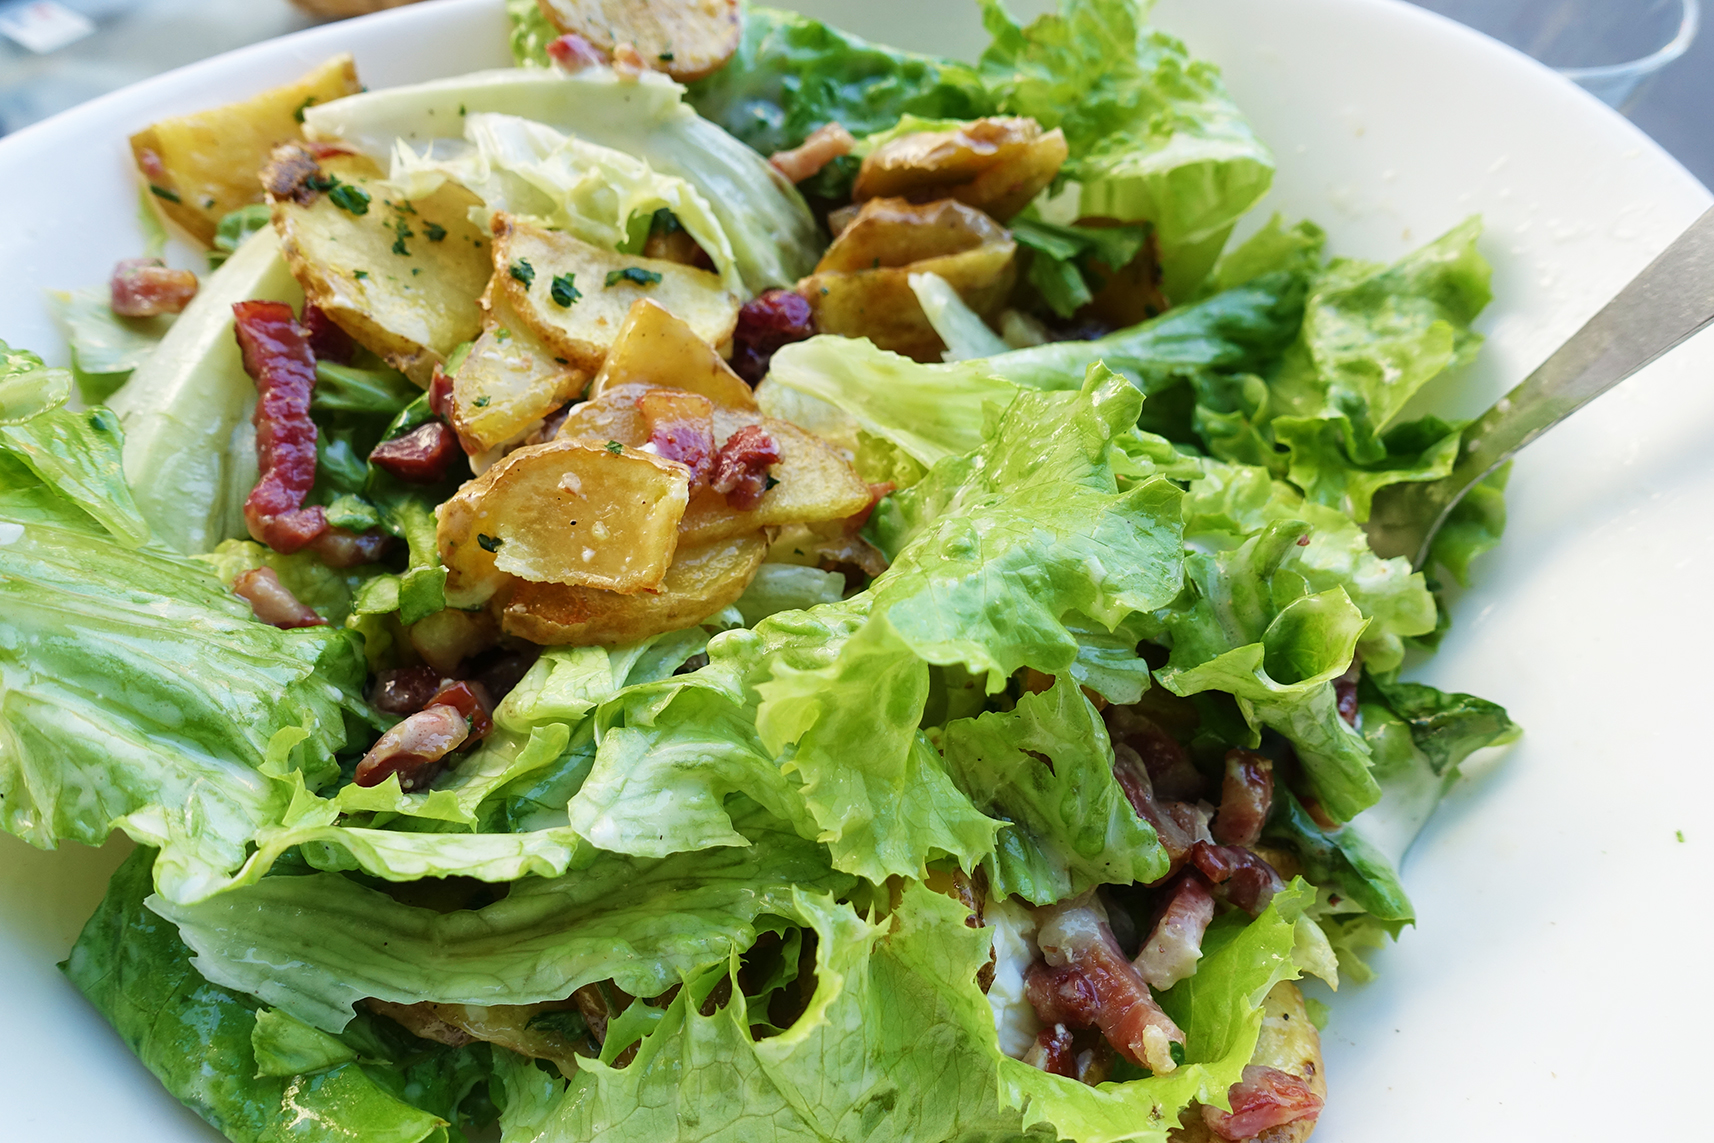 Salade Paysanne | Traditional Salad From France